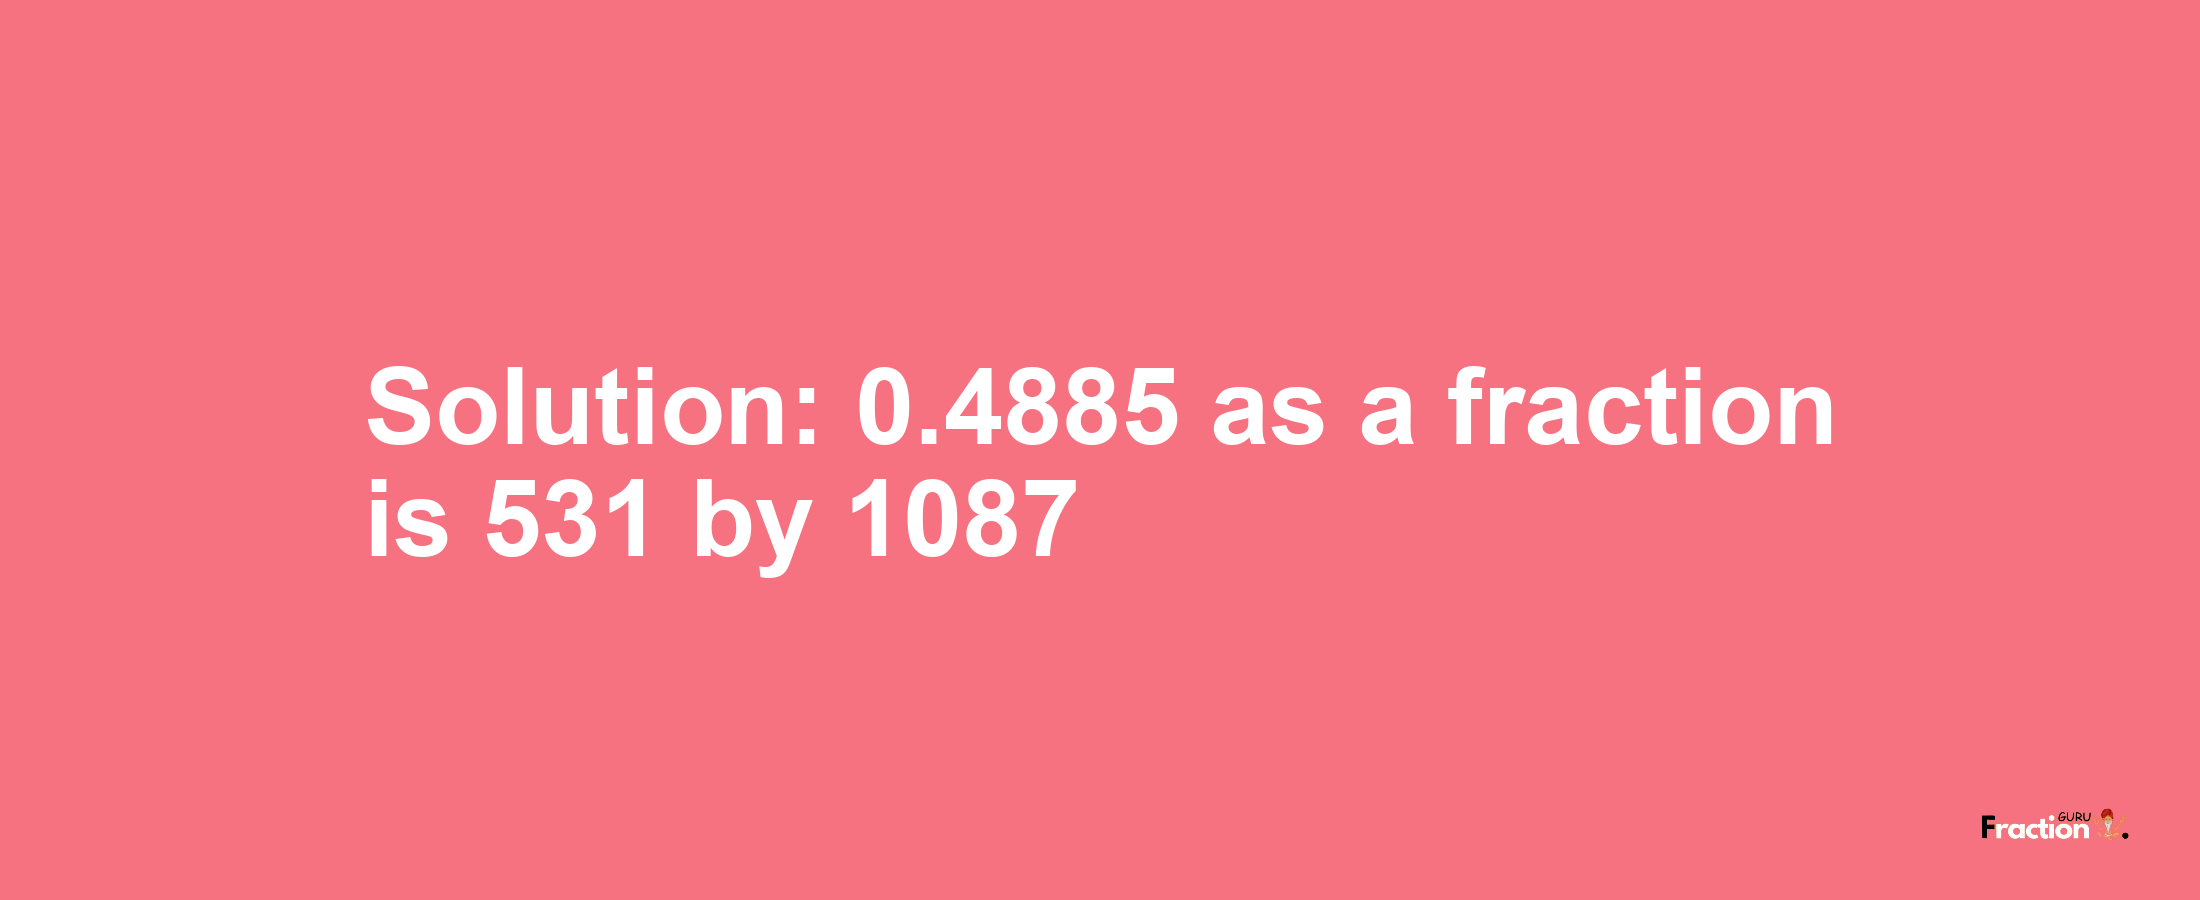 Solution:0.4885 as a fraction is 531/1087